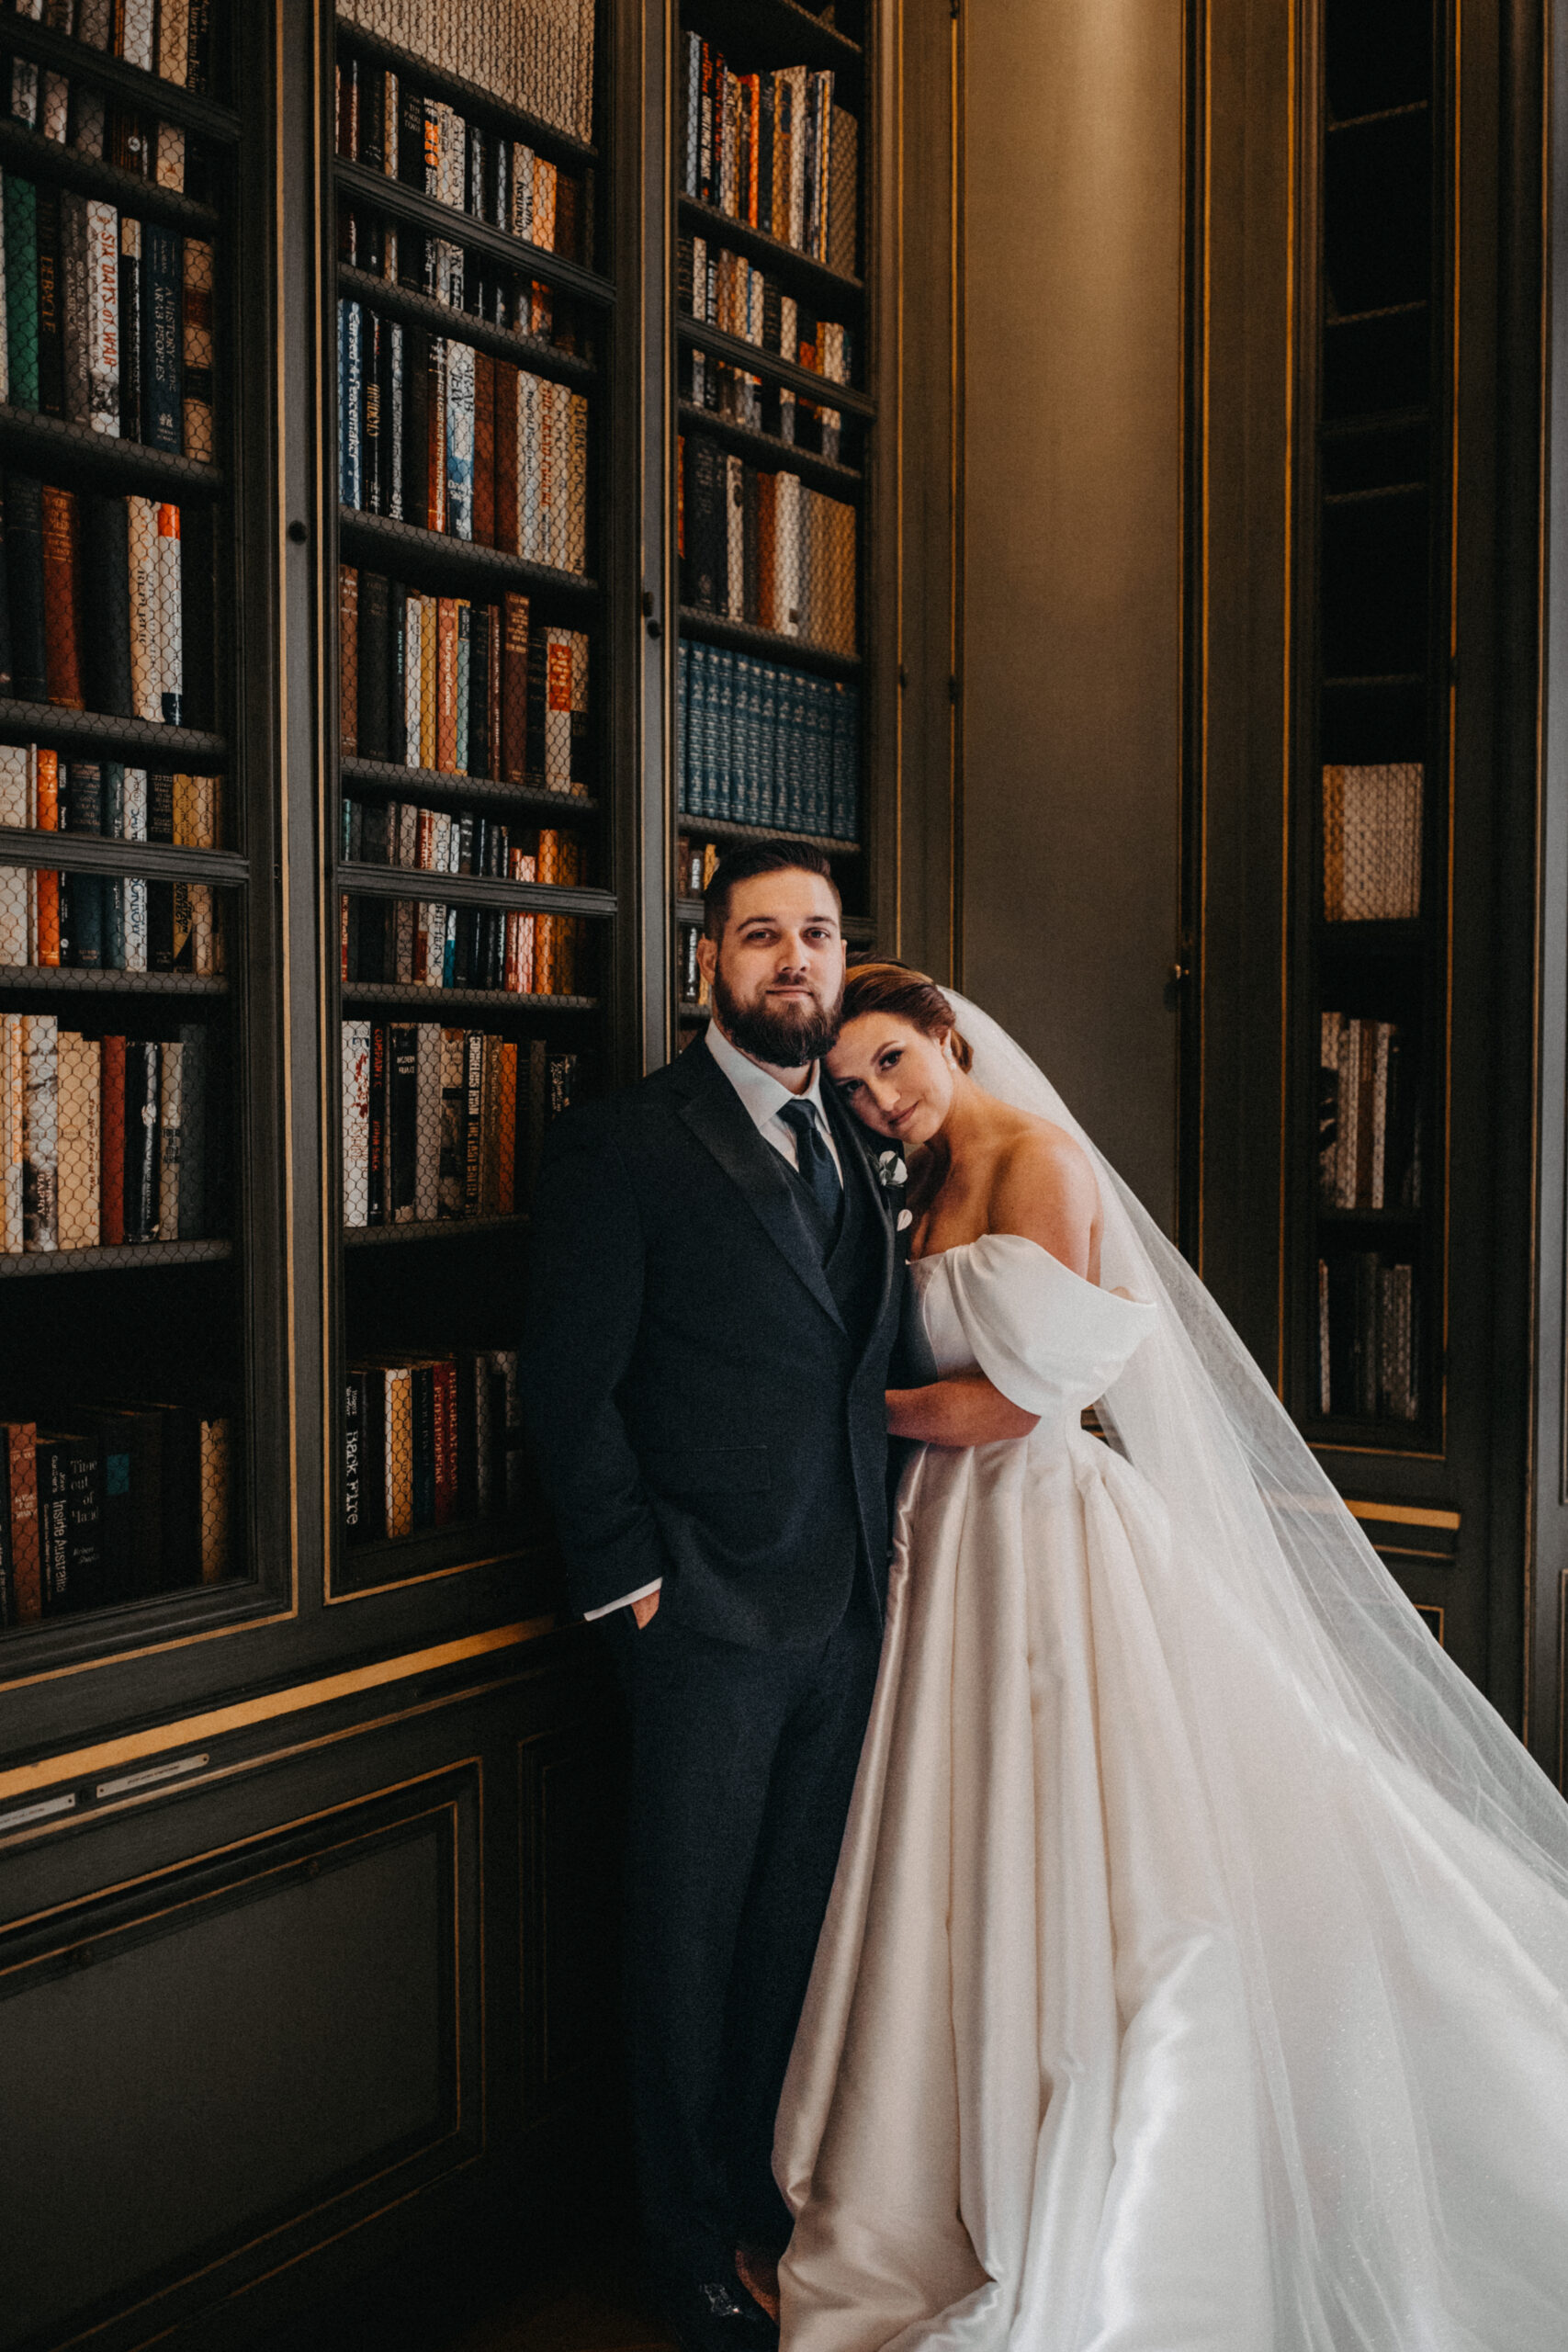 Couple just married at Meridian House in Washington, DC.